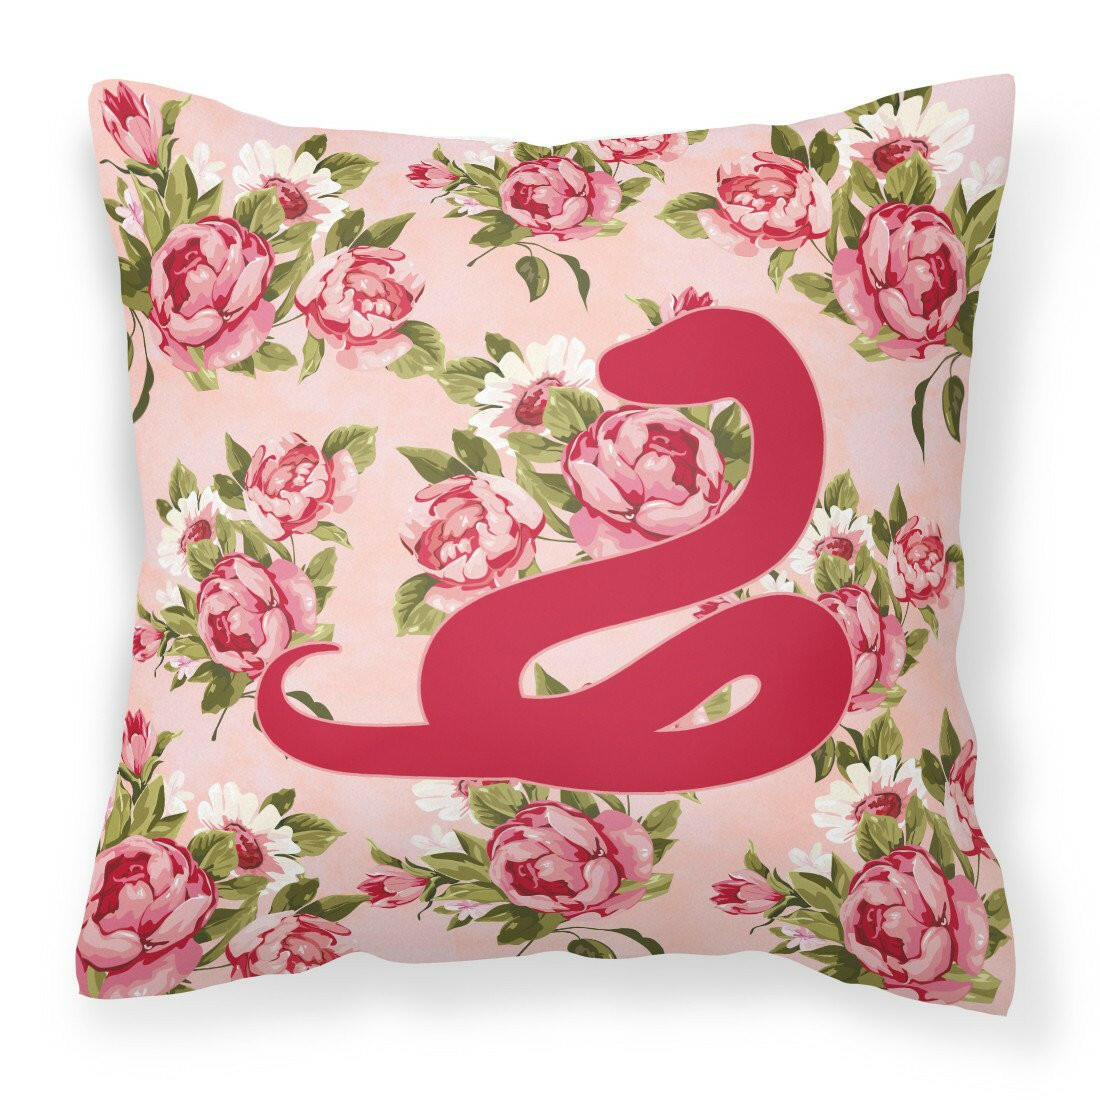 Snake Shabby Chic Pink Roses  Fabric Decorative Pillow BB1124-RS-PK-PW1414 - the-store.com